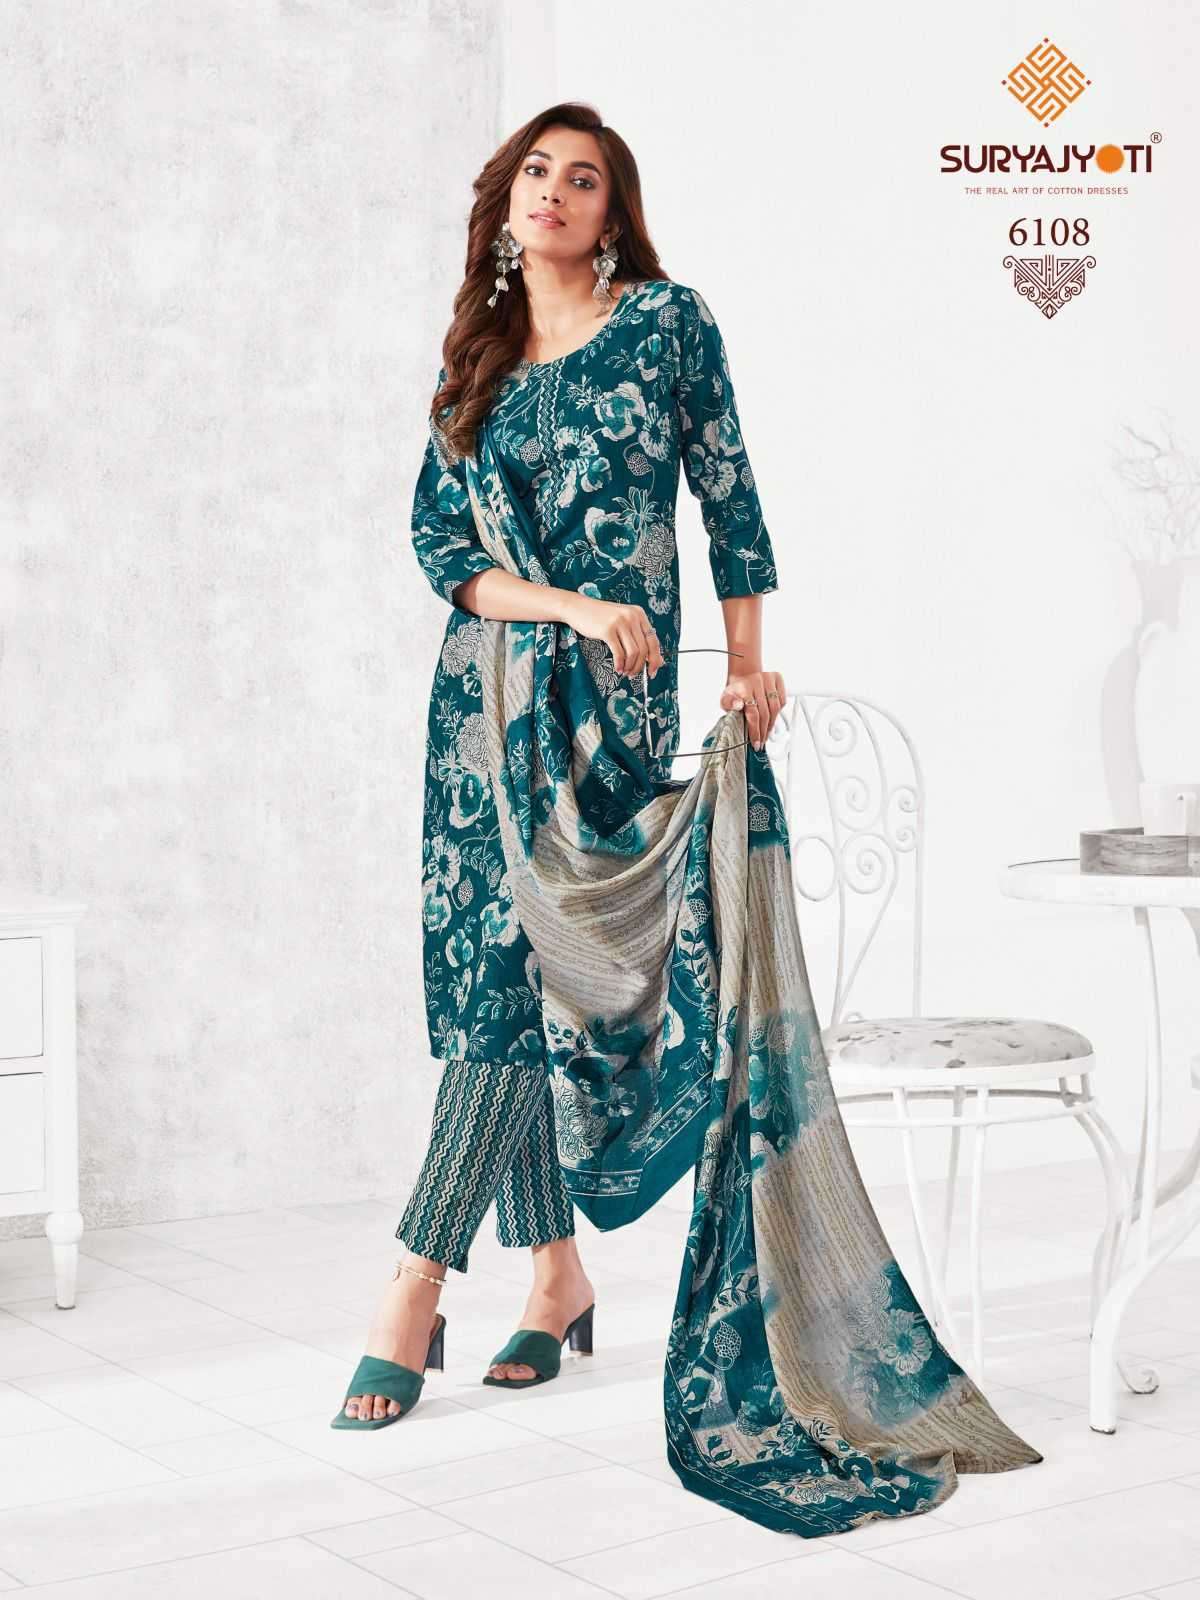 TRENDY COTTON VOL-61 SERIES 6101 TO 6120 BY SURYJYOTI DESIGNER WITH PRINTED COTTON READYMADE SUITS ARE AVAILABLE AT WHOLESALE PRICE